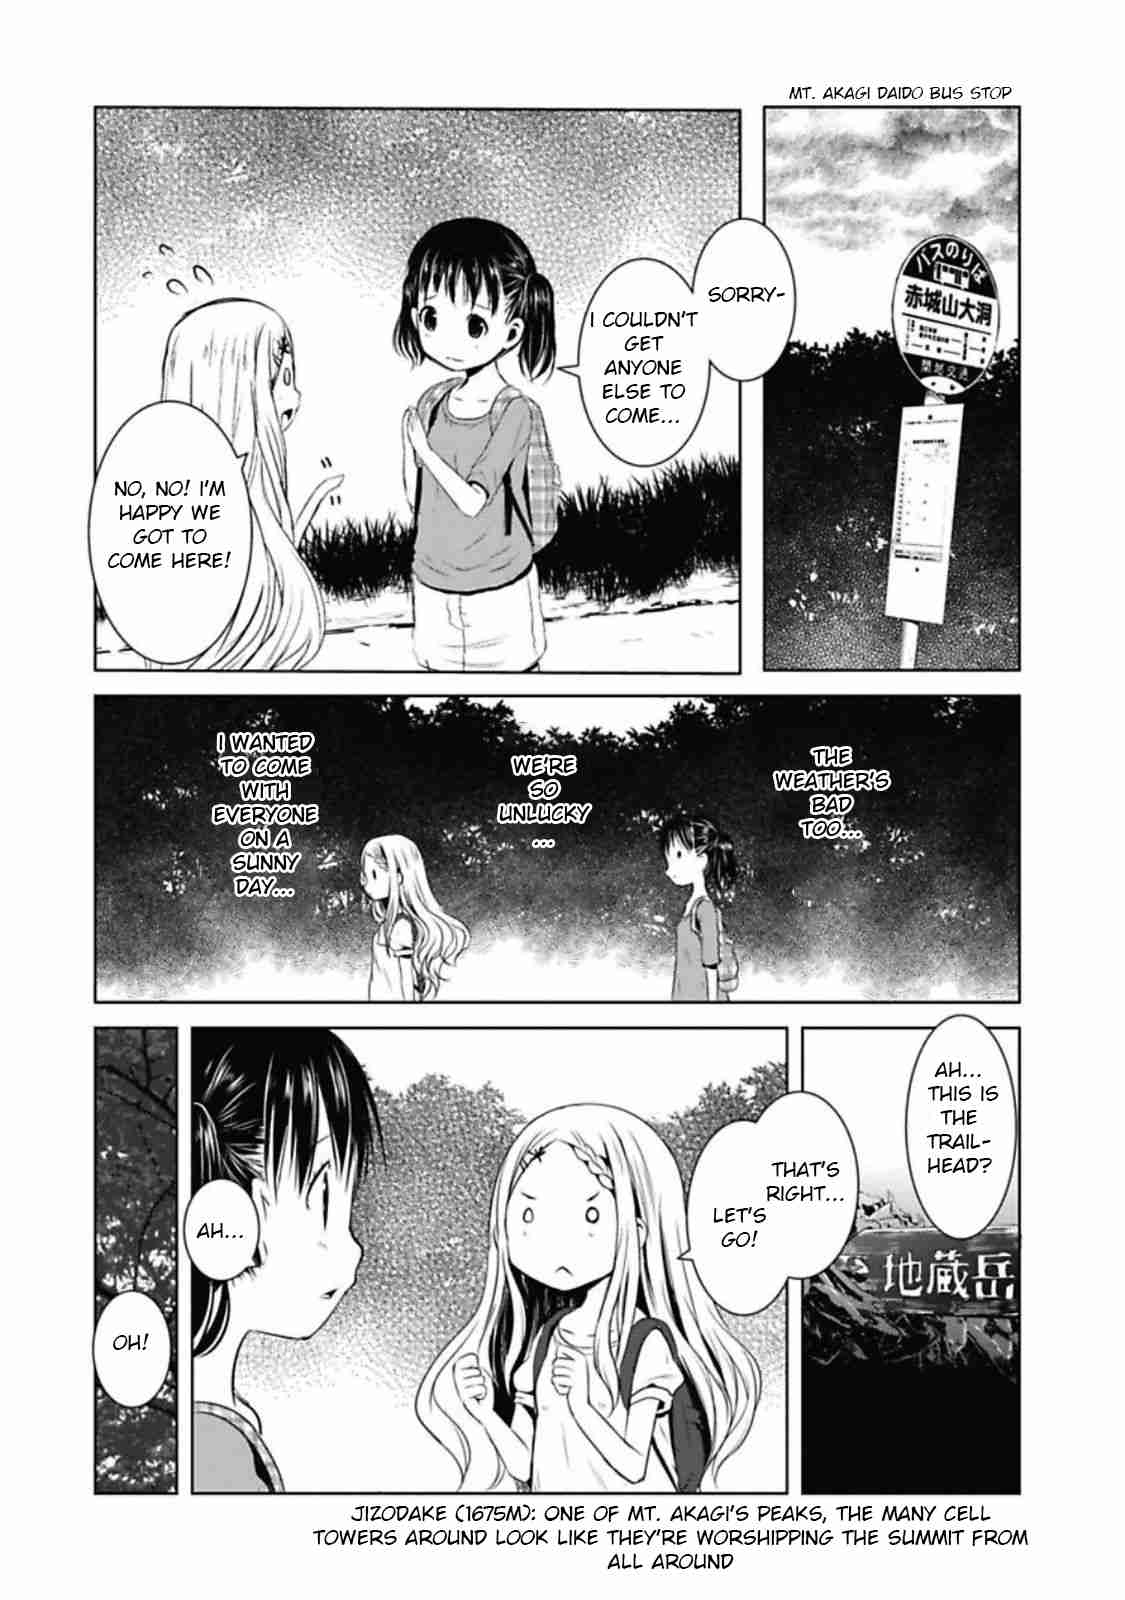 Yama no Susume Vol. 5 Ch. 35 The Things Forgotten On A Rainy Day